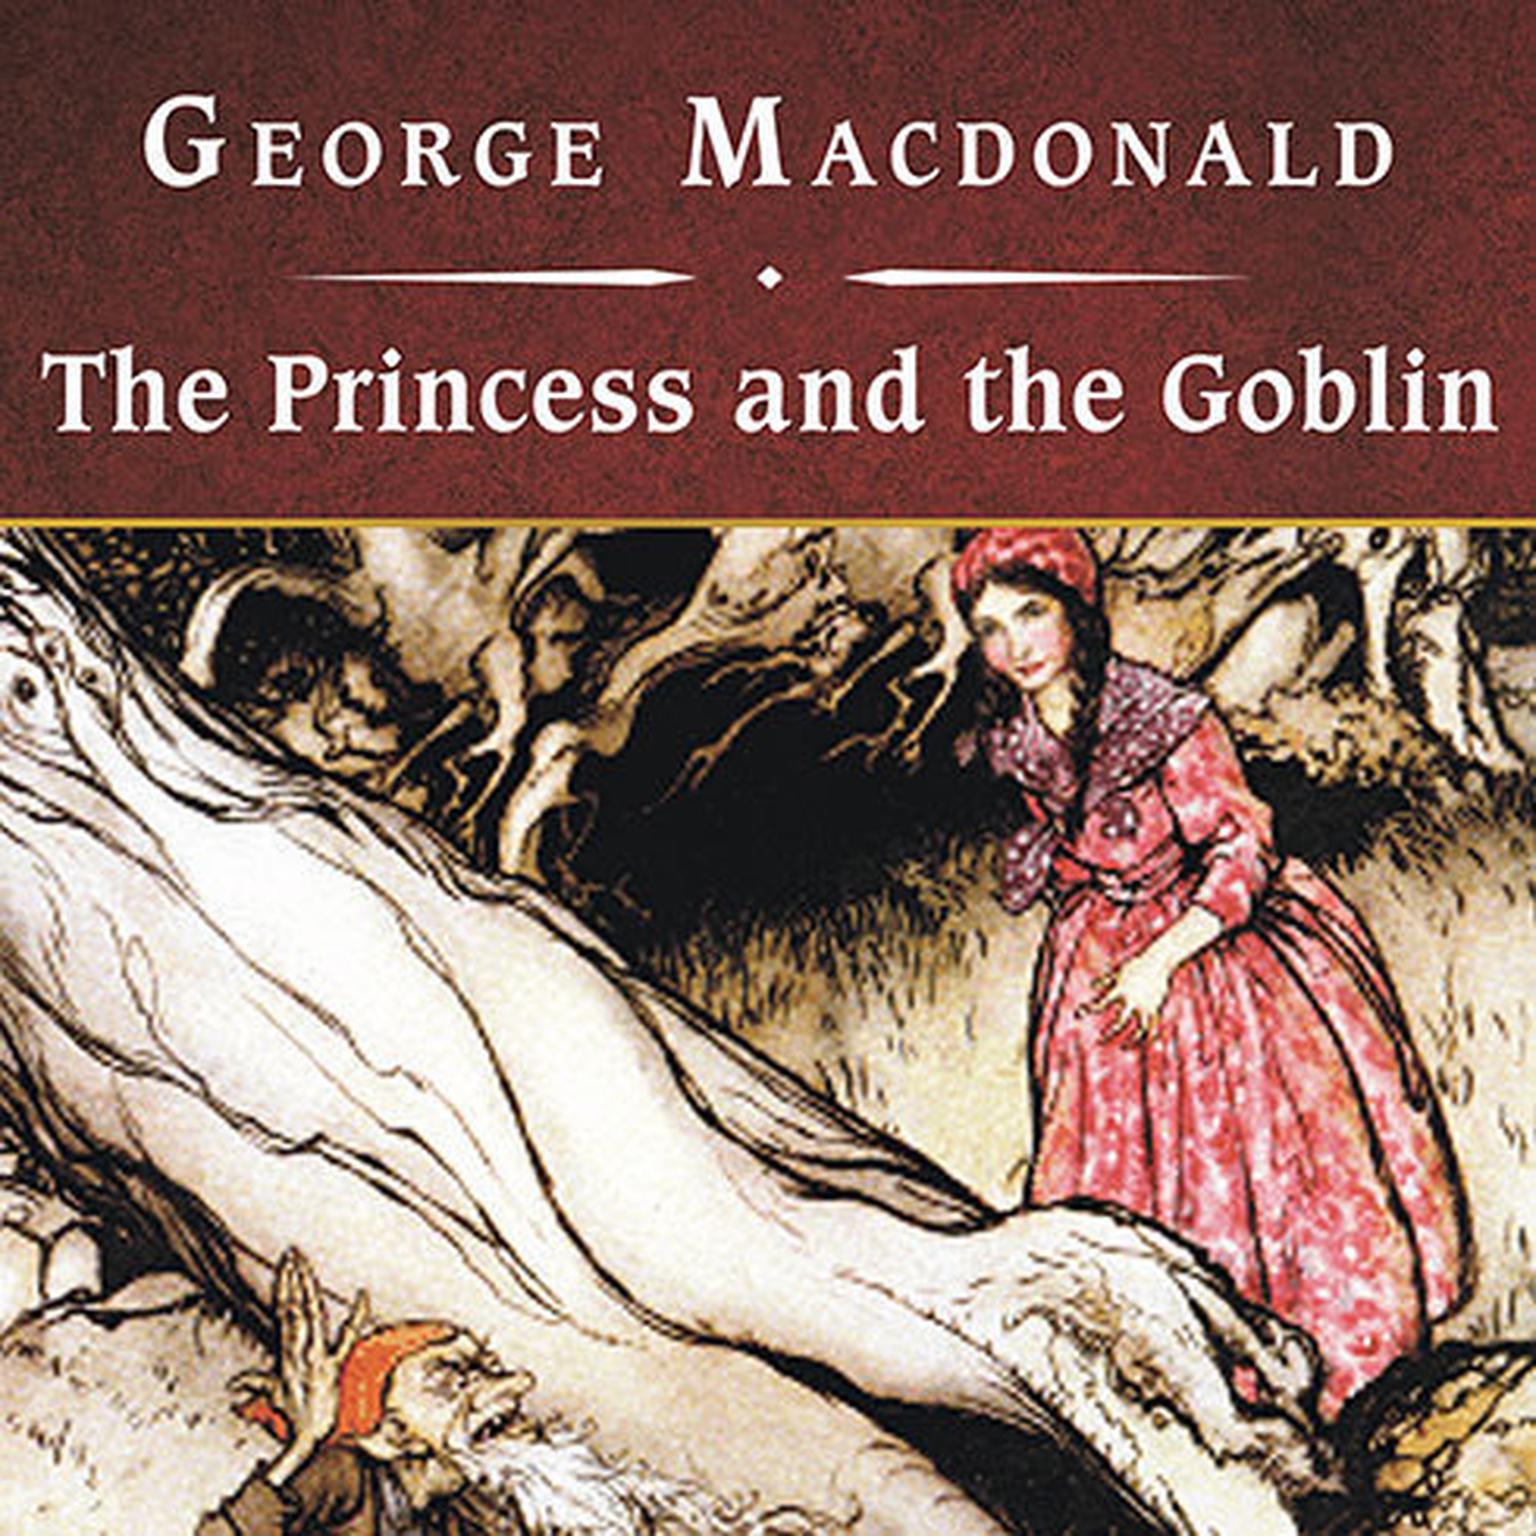 The Princess and the Goblin, with eBook Audiobook, by George MacDonald